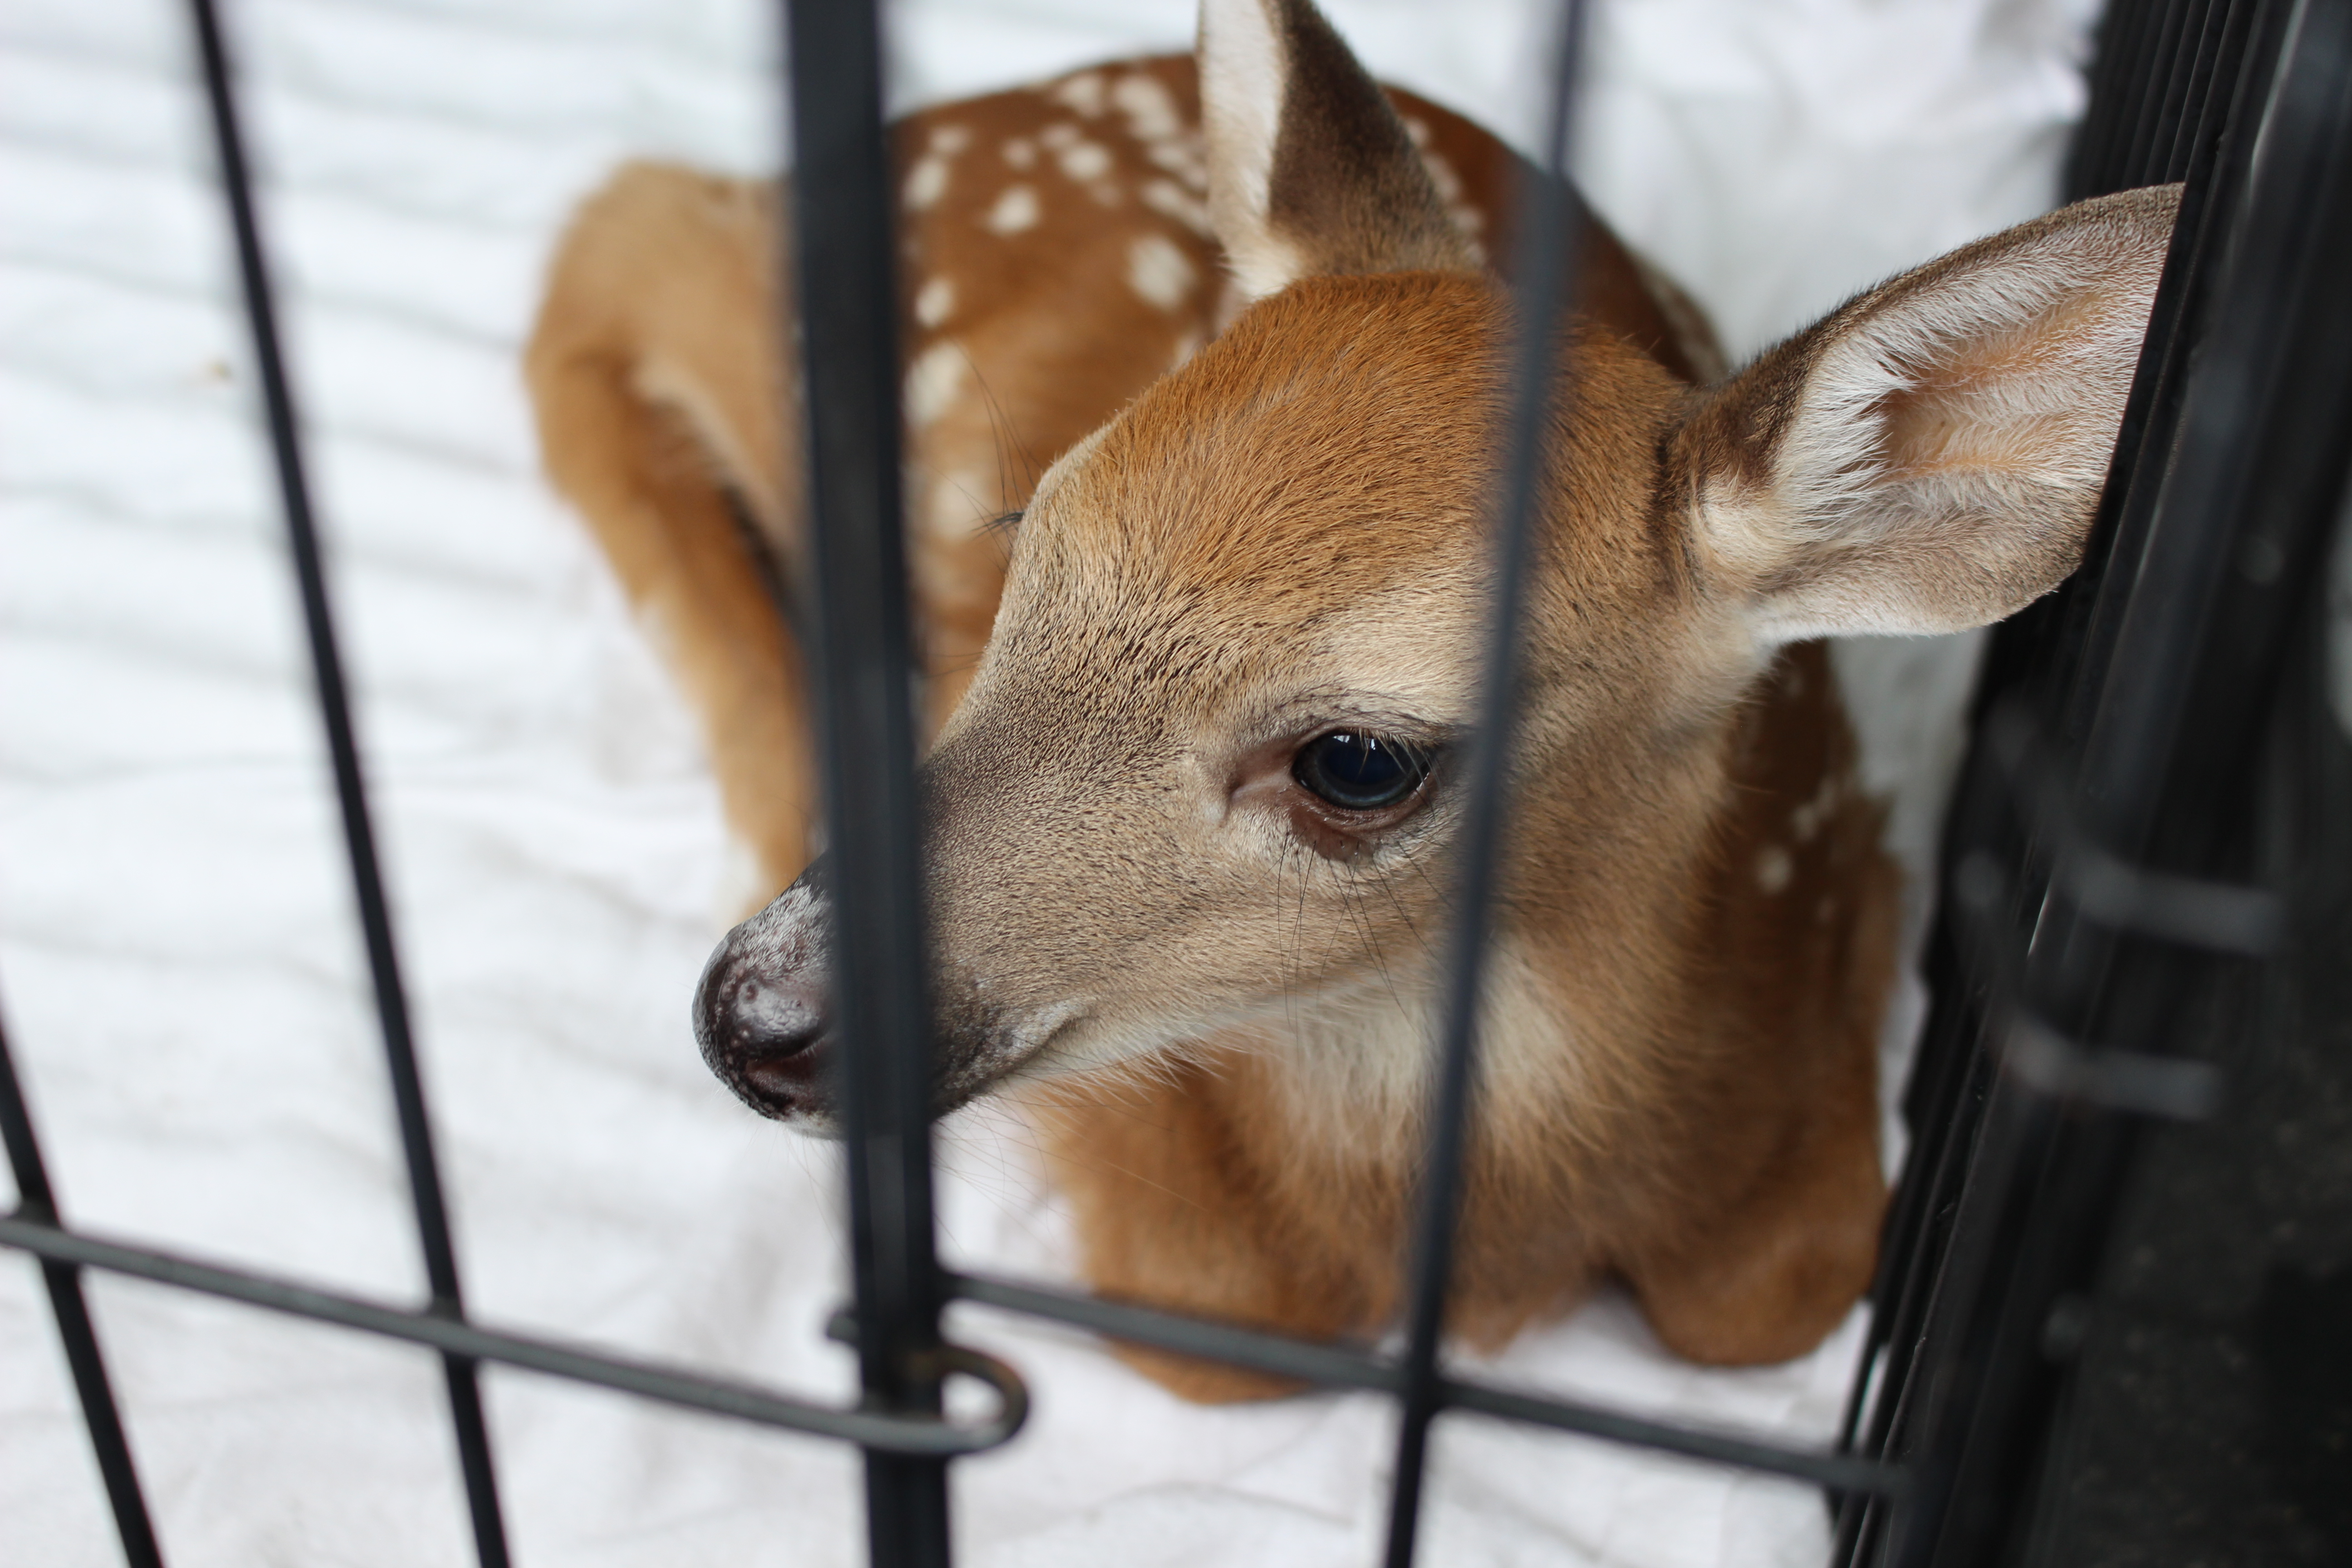 What to do if you find orphaned wildlife - Ontario SPCA and Humane Society